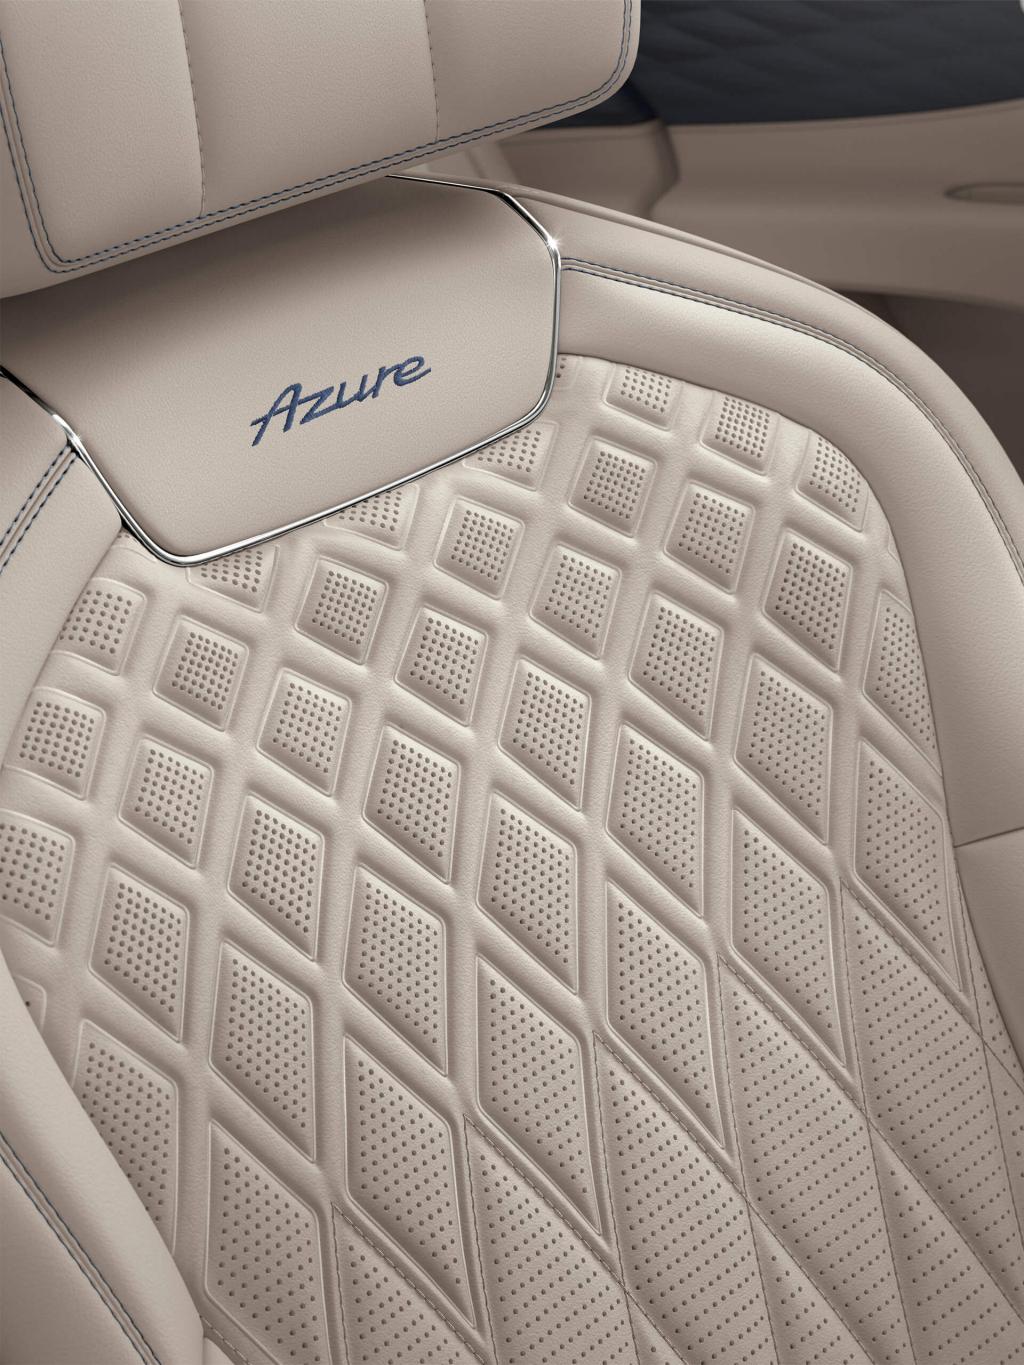 Bentley Flying Spur Azure seats featuring diamond loafted pattern with detailed contrast stitching and Azure Emblems in Imperial Blue colour contrast stitched in Portland hide.